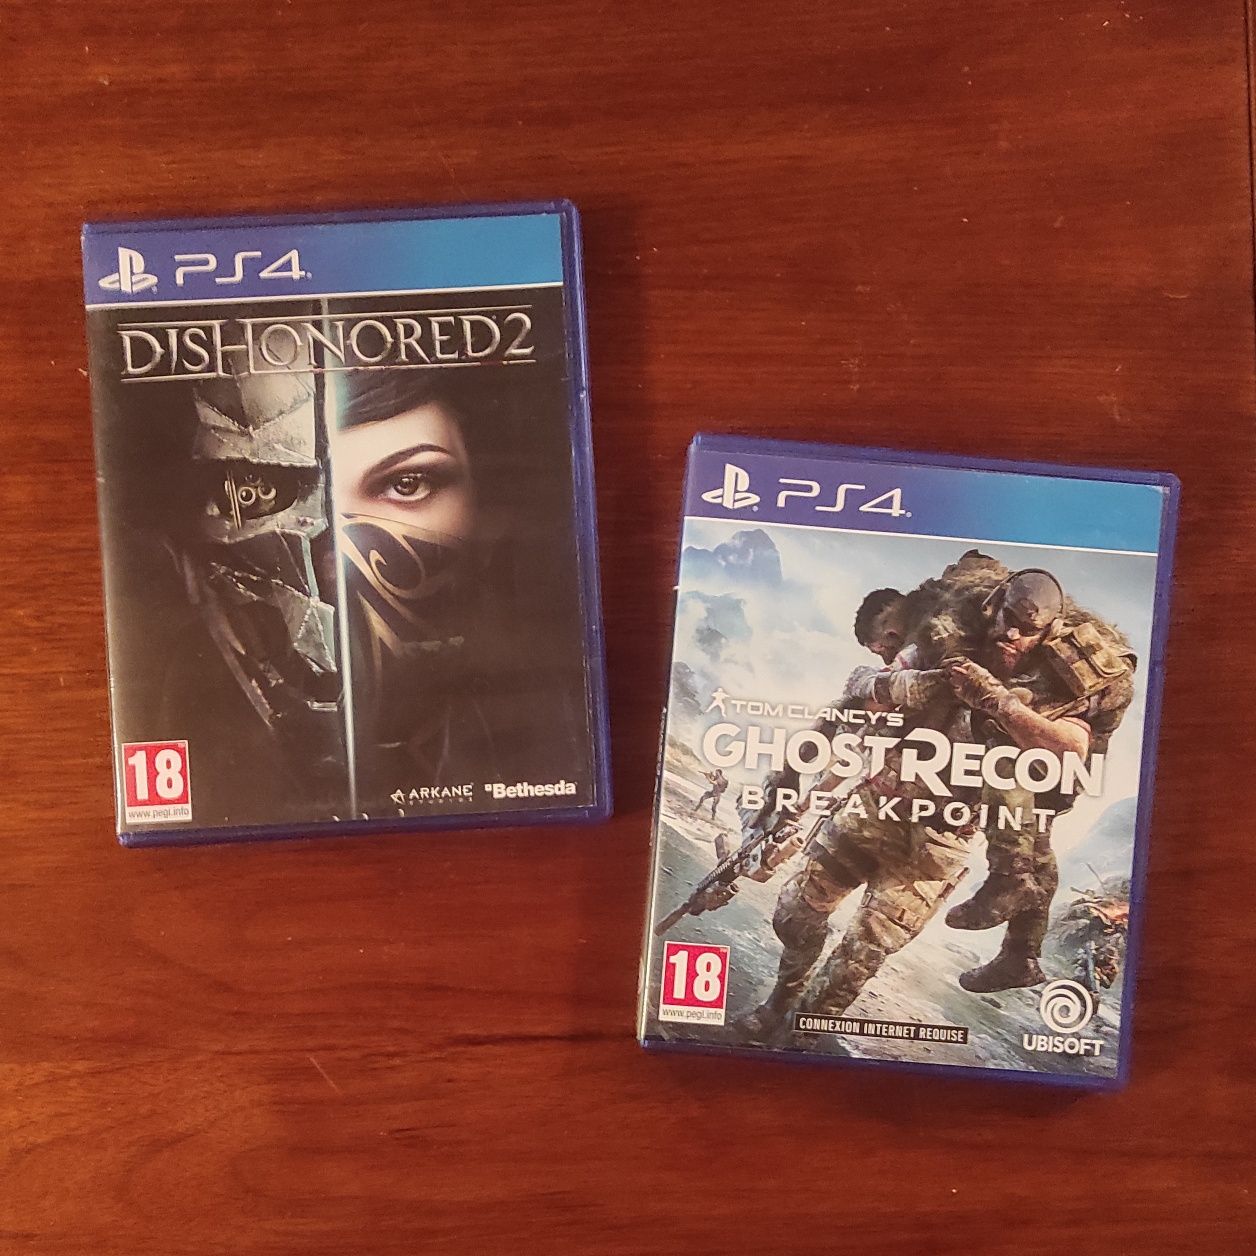 PS4 Dishonored 2 / Ghost Recon Breakpoint